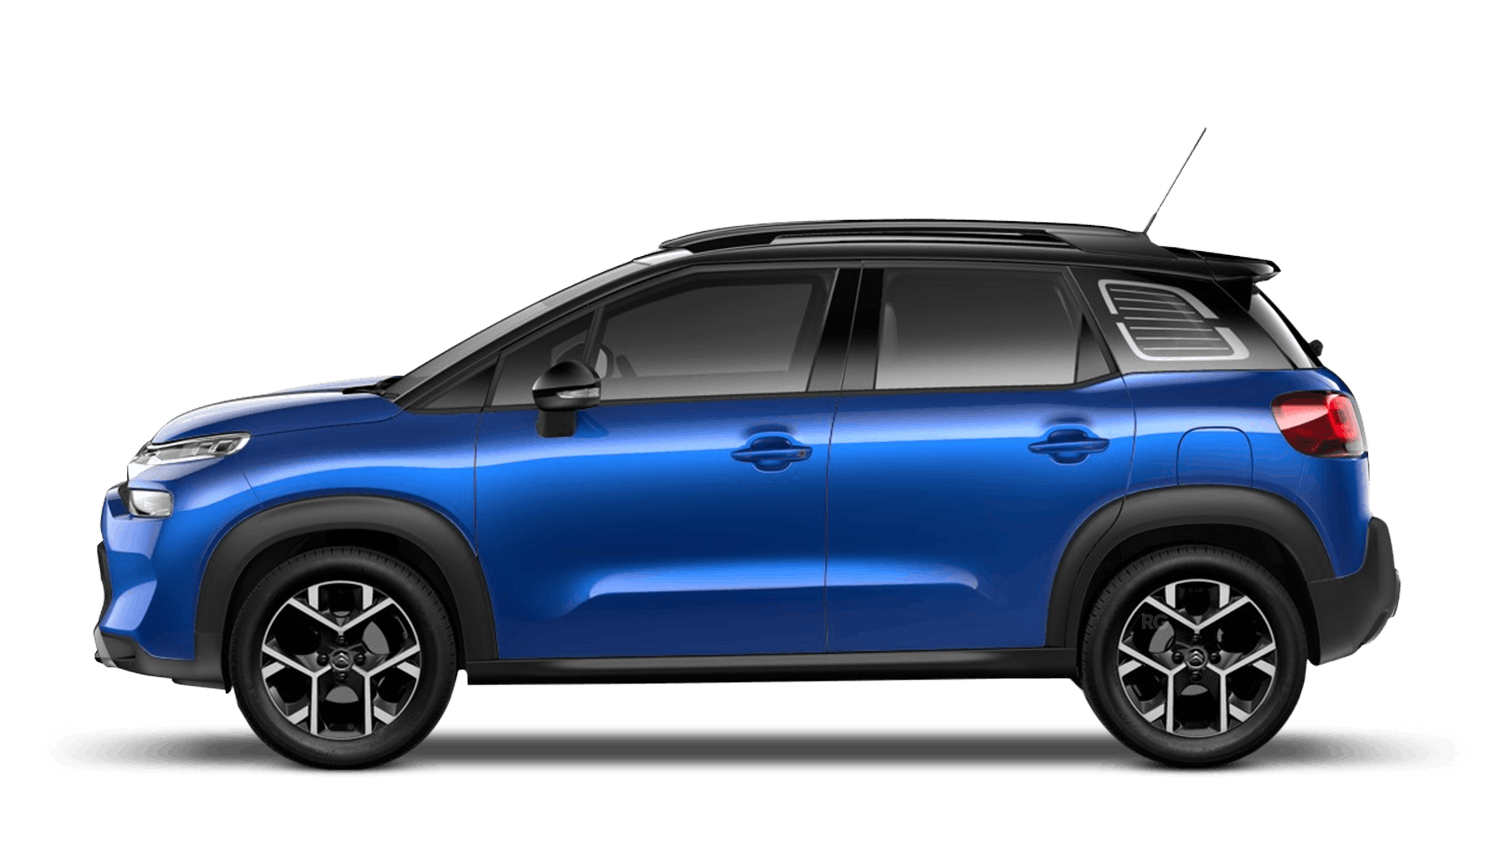 Citroën C3 Aircross Max PureTech 110 S&S 6 speed manual -  PCP Finance Offer